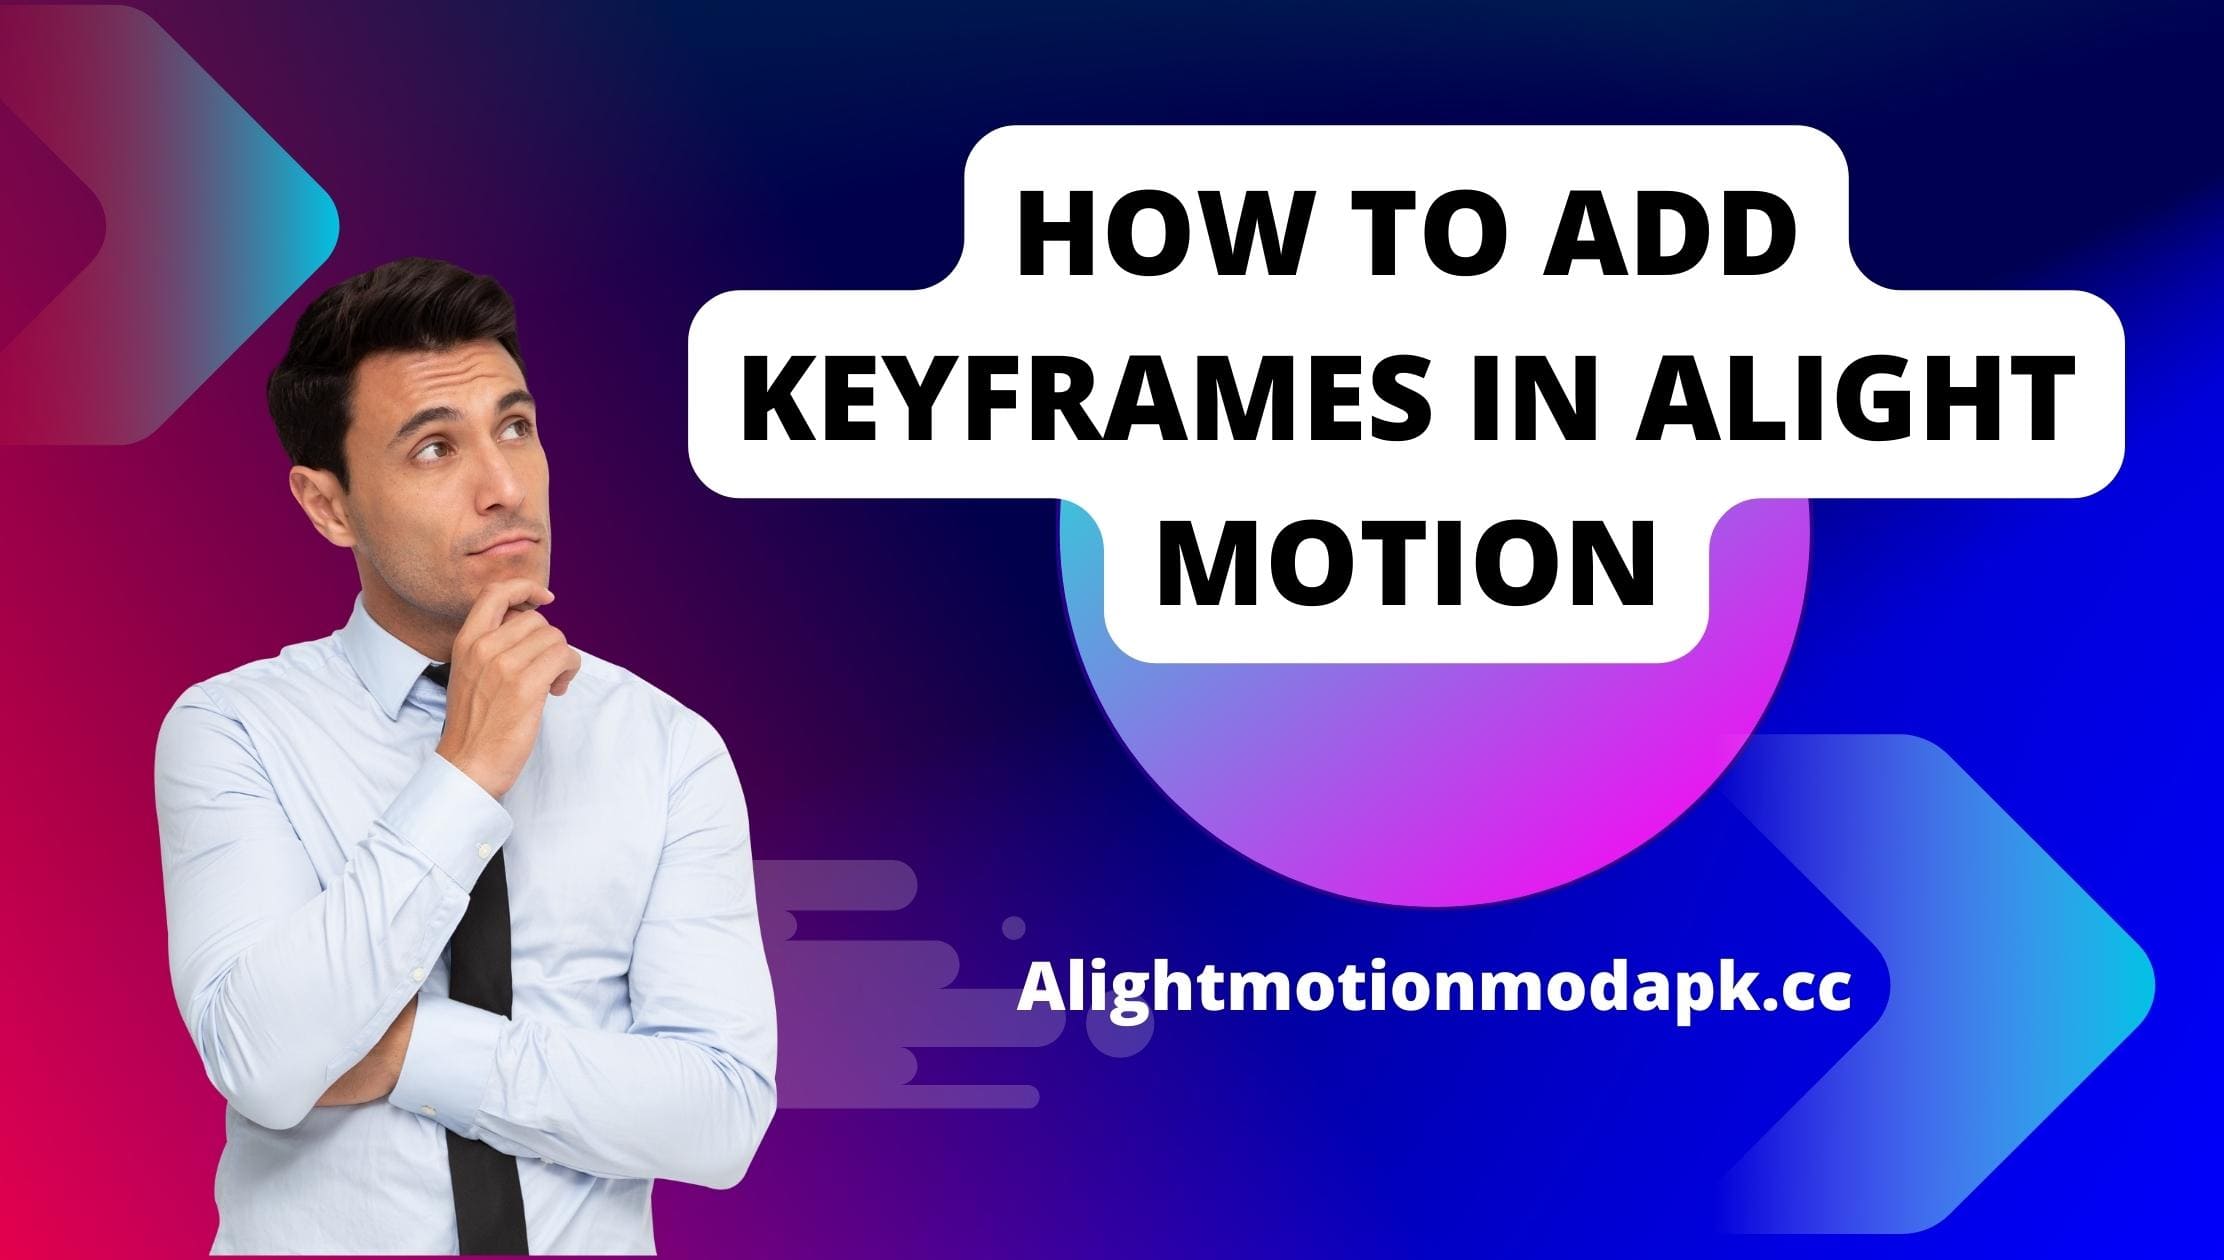 How To Add Keyframes In Alight Motion